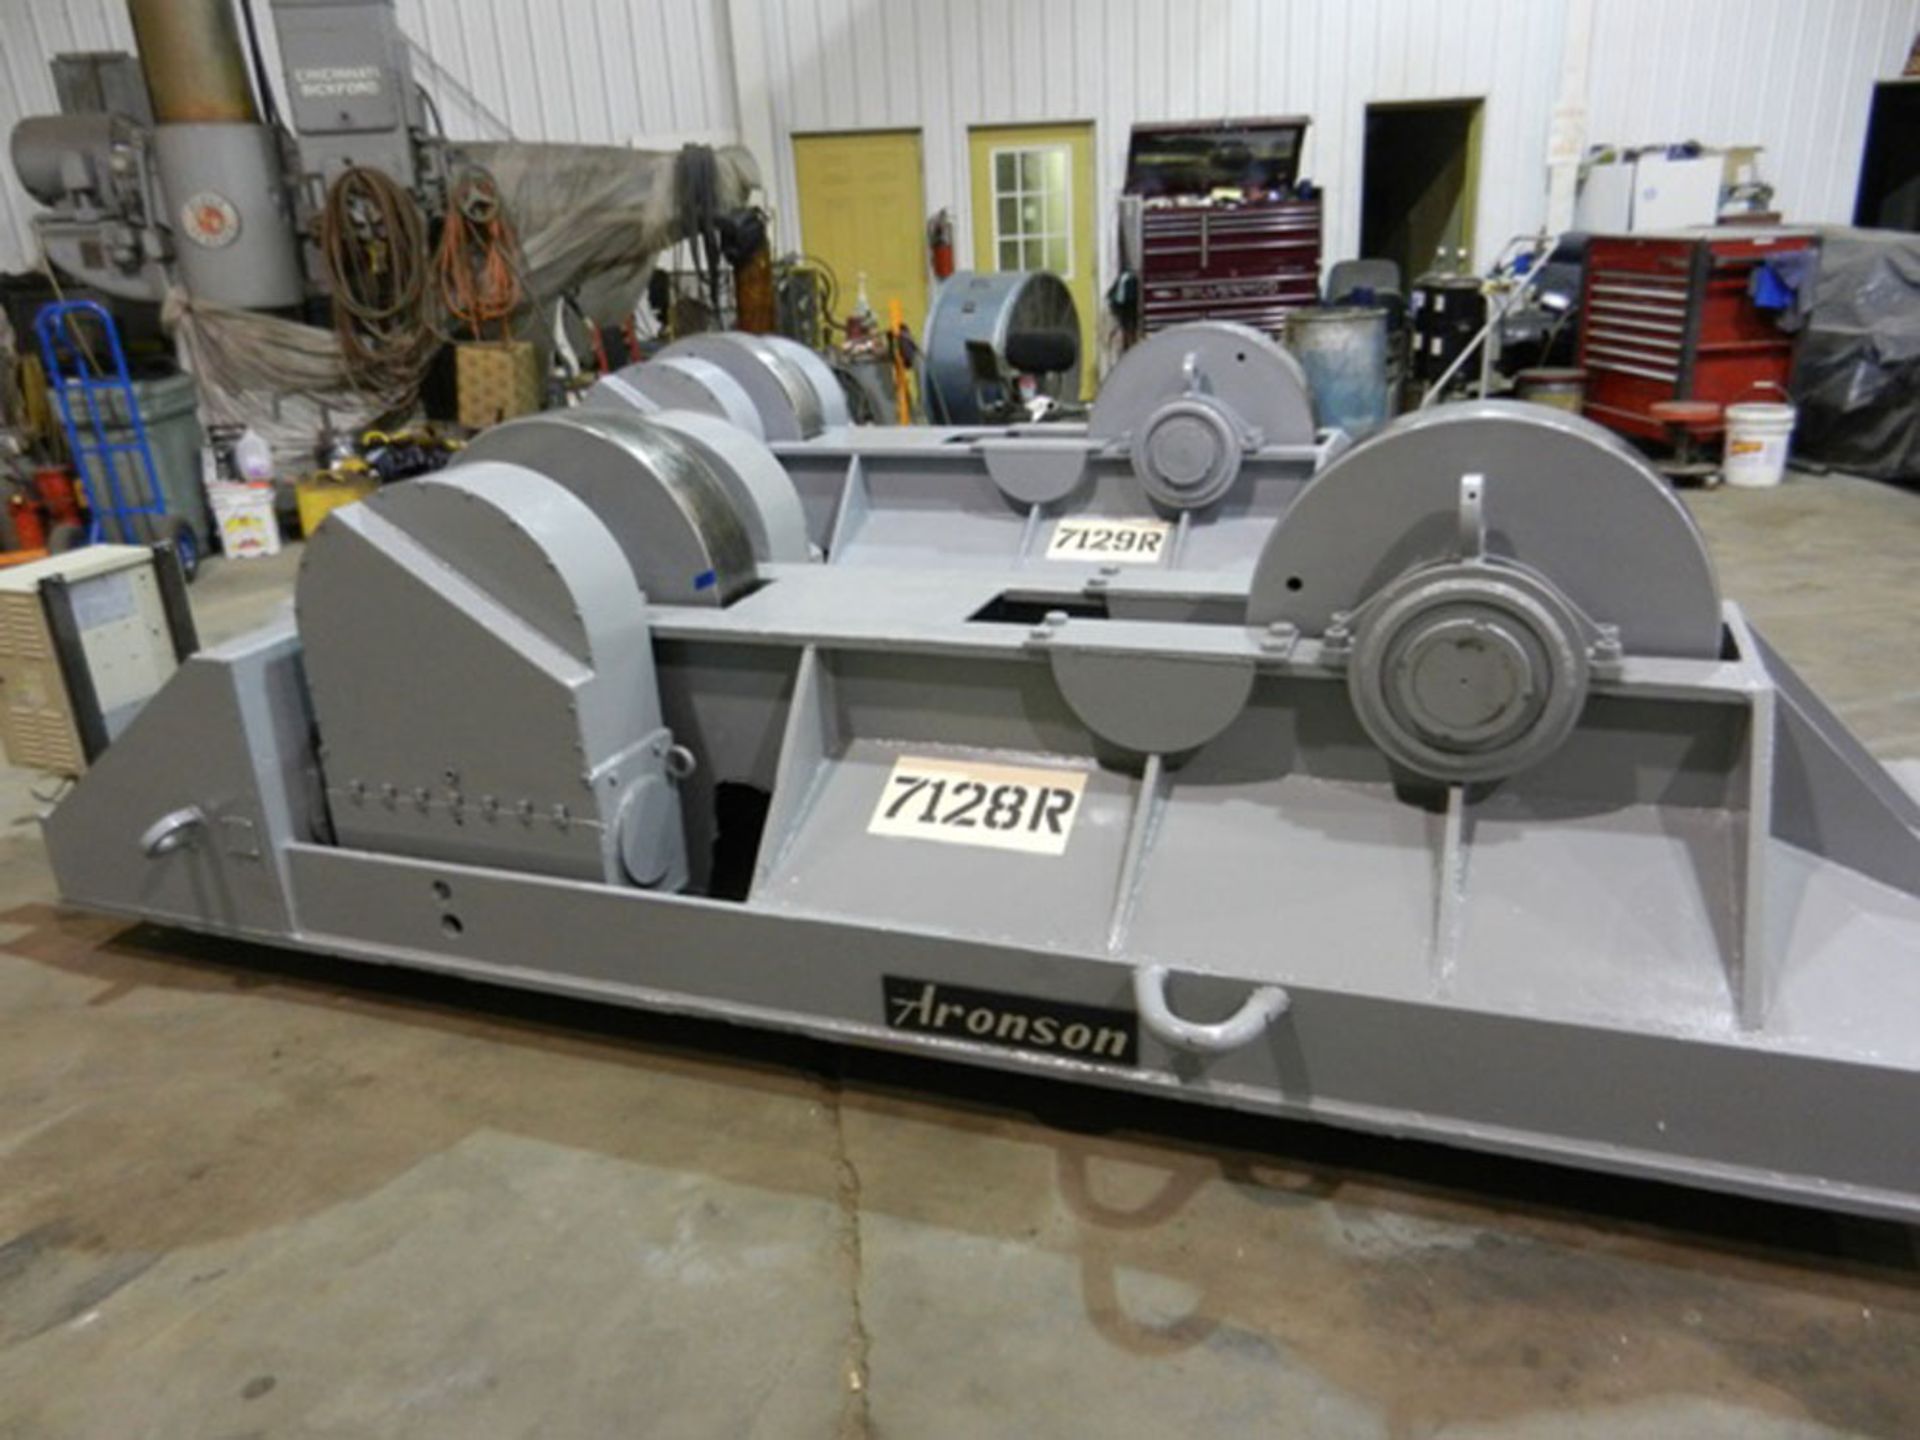 Aronson Driver & Idler Power Tank Roll Set, 600 Ton, Mdl: WSD600 & WSI600 - Painesville, OH - 7365P - Image 3 of 4